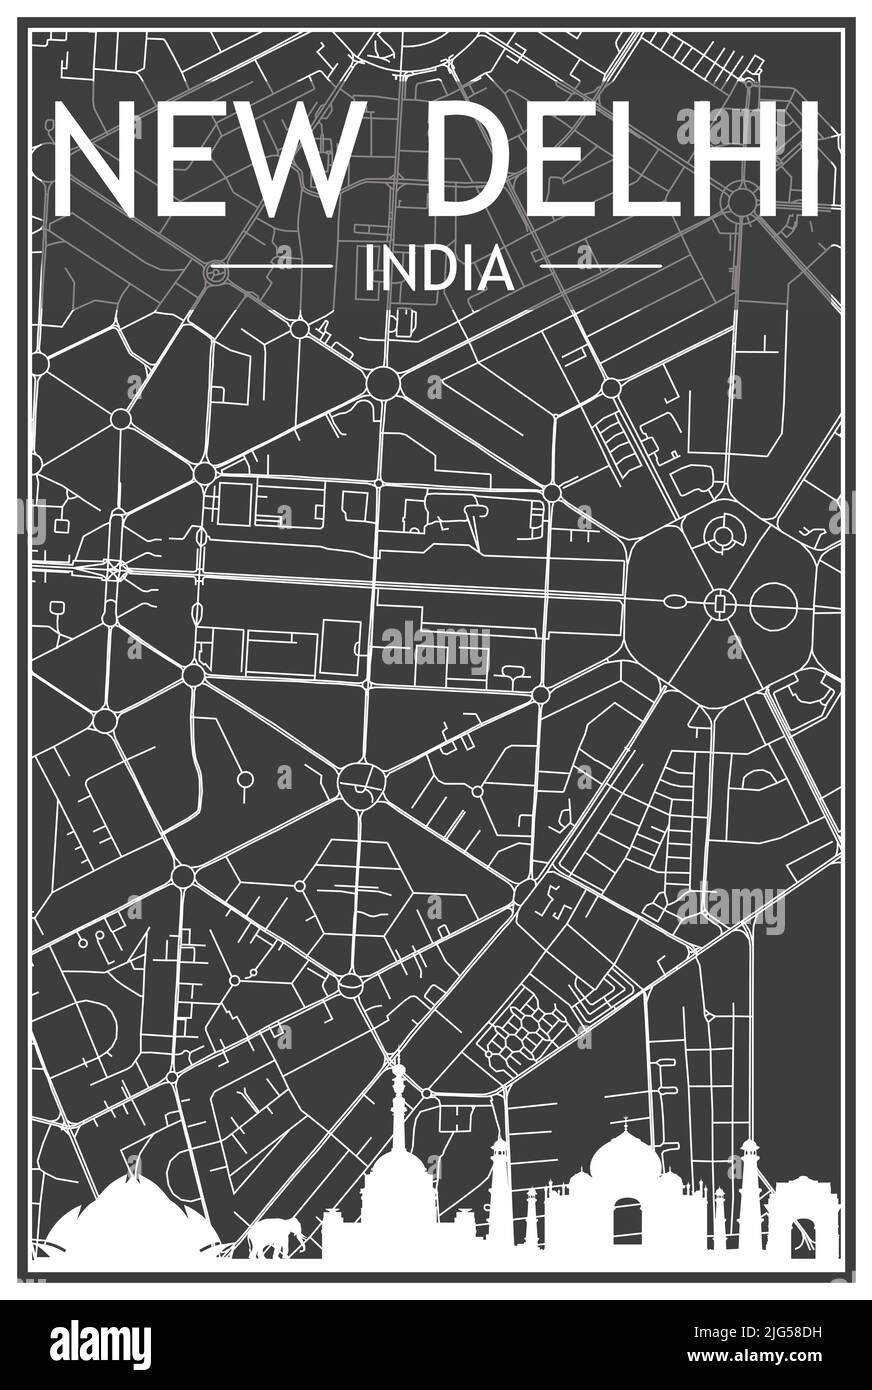 Dark printout city poster with panoramic skyline and hand-drawn streets network on dark gray background of the downtown NEW DELHI, INDIA Stock Vector